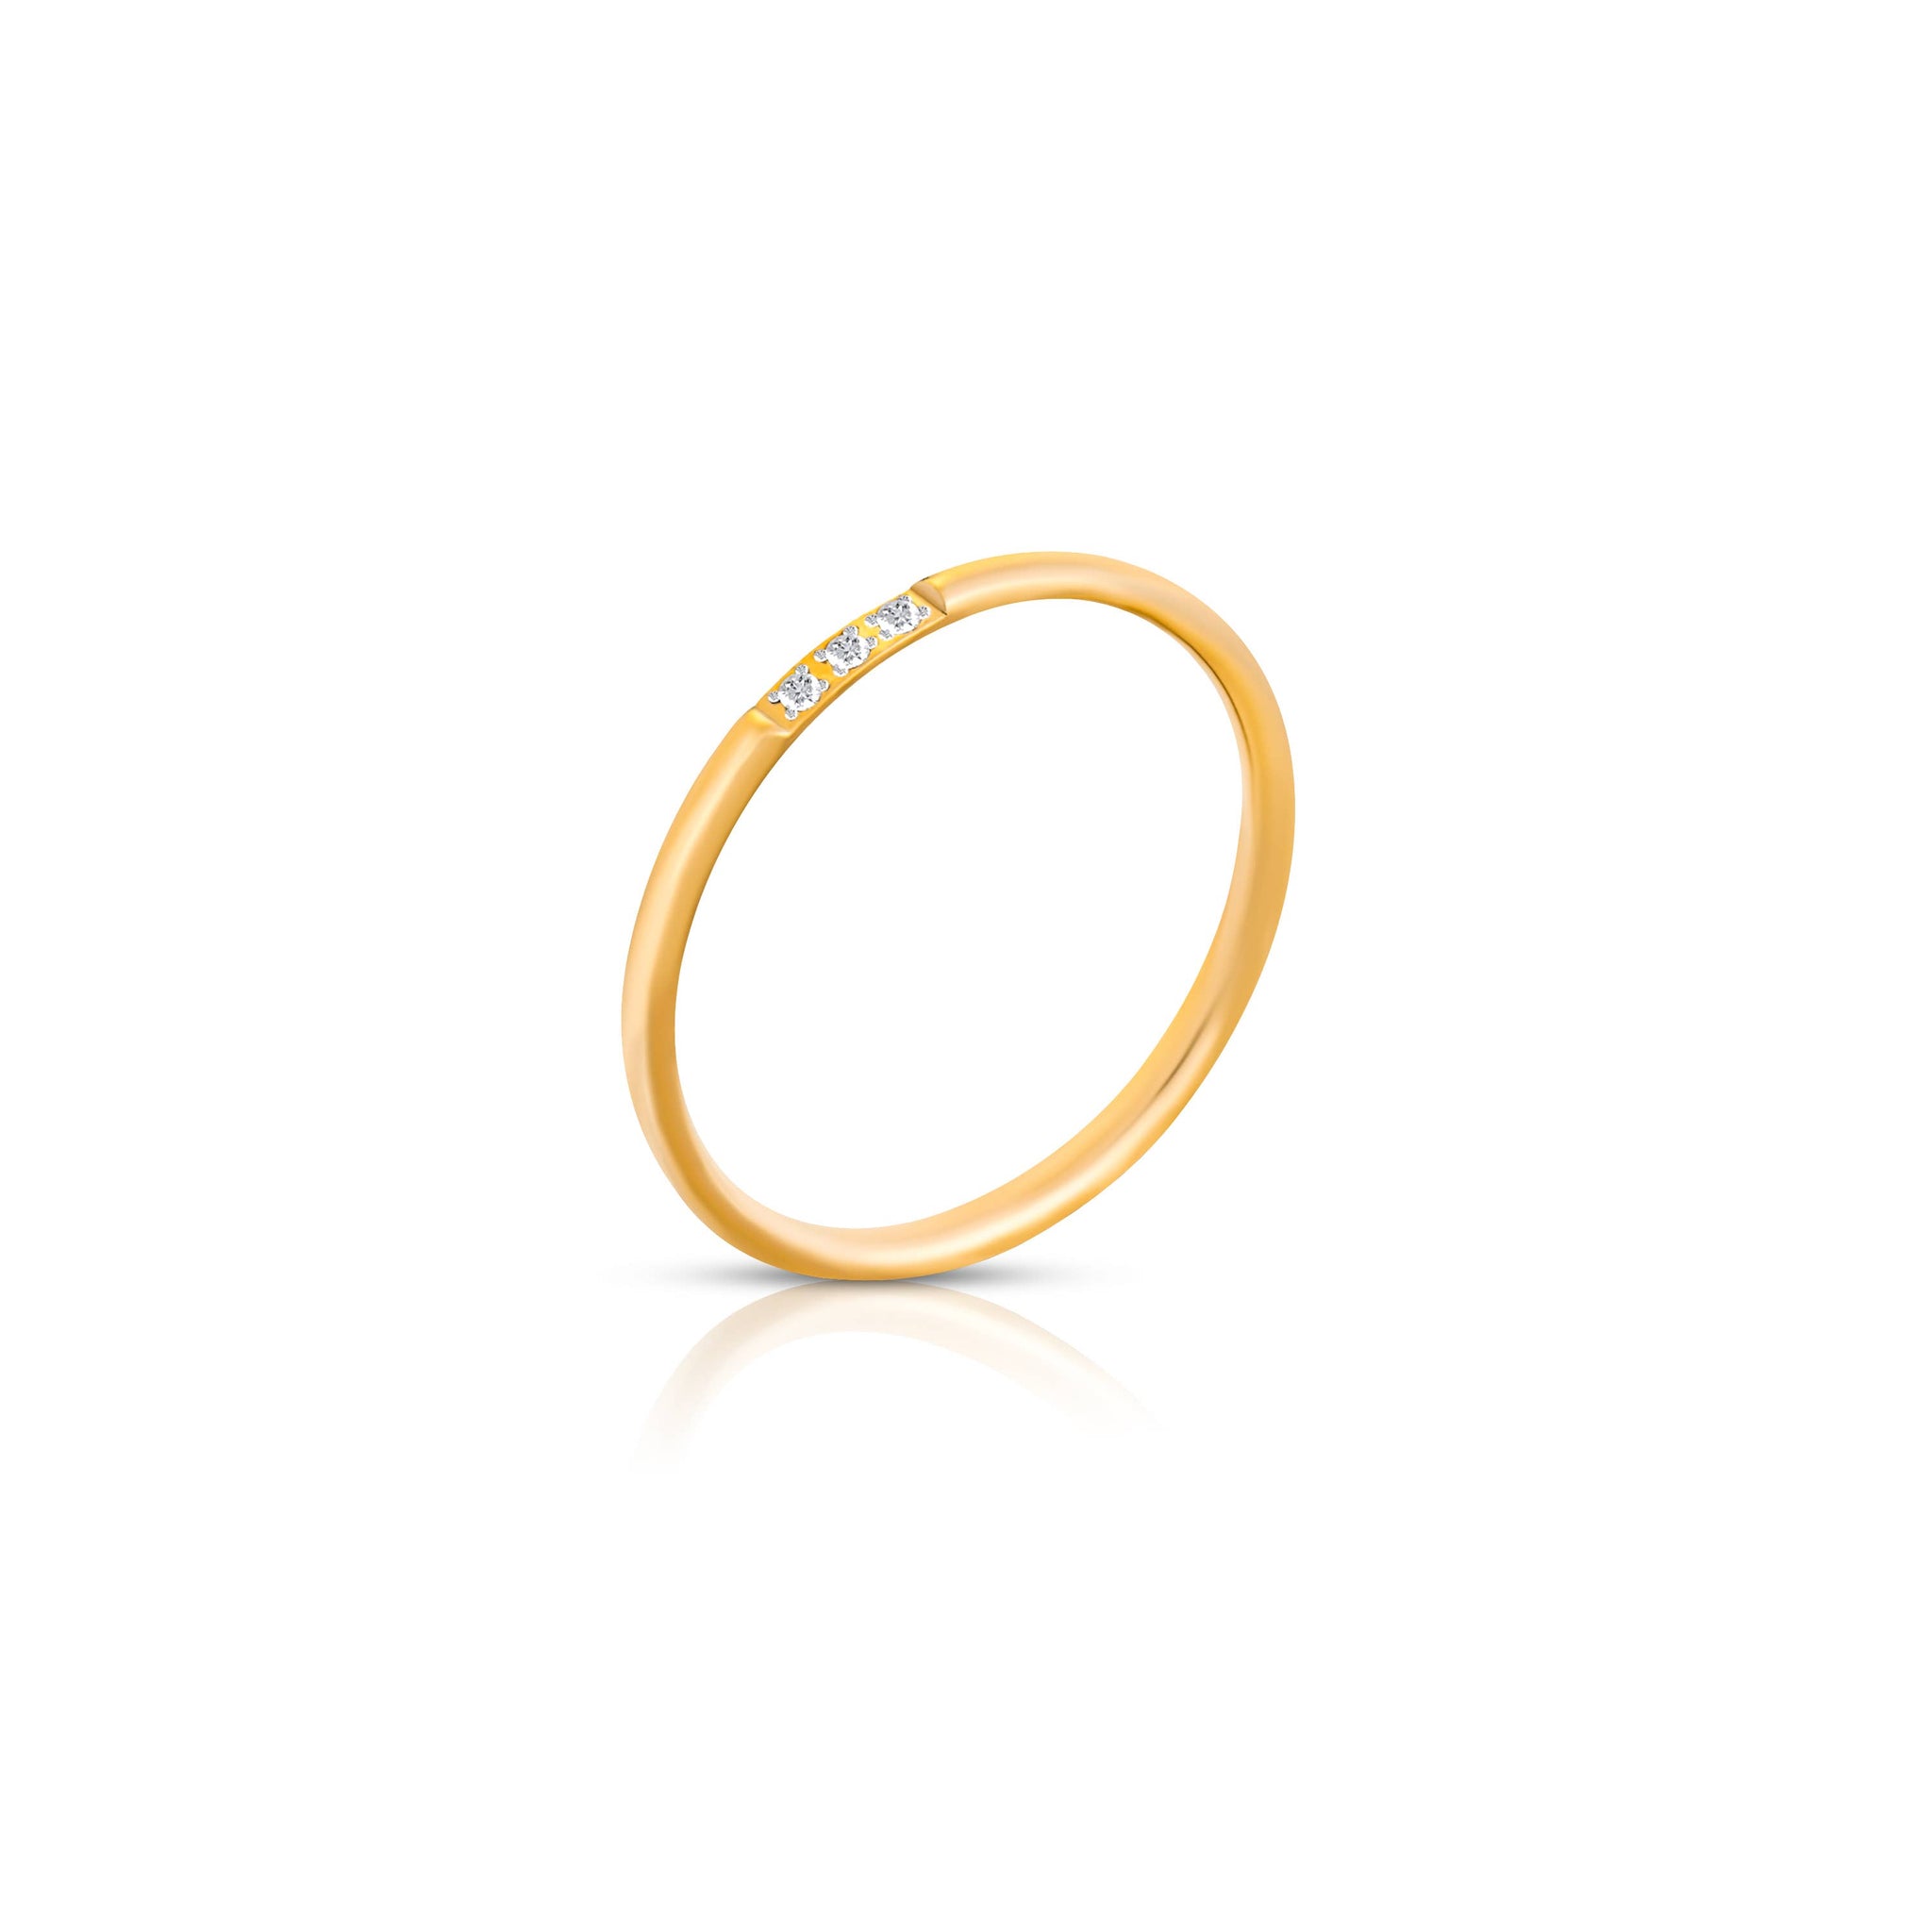 Ellie Vail Jewelry - Ellie Vail - Thea Dainty Ring